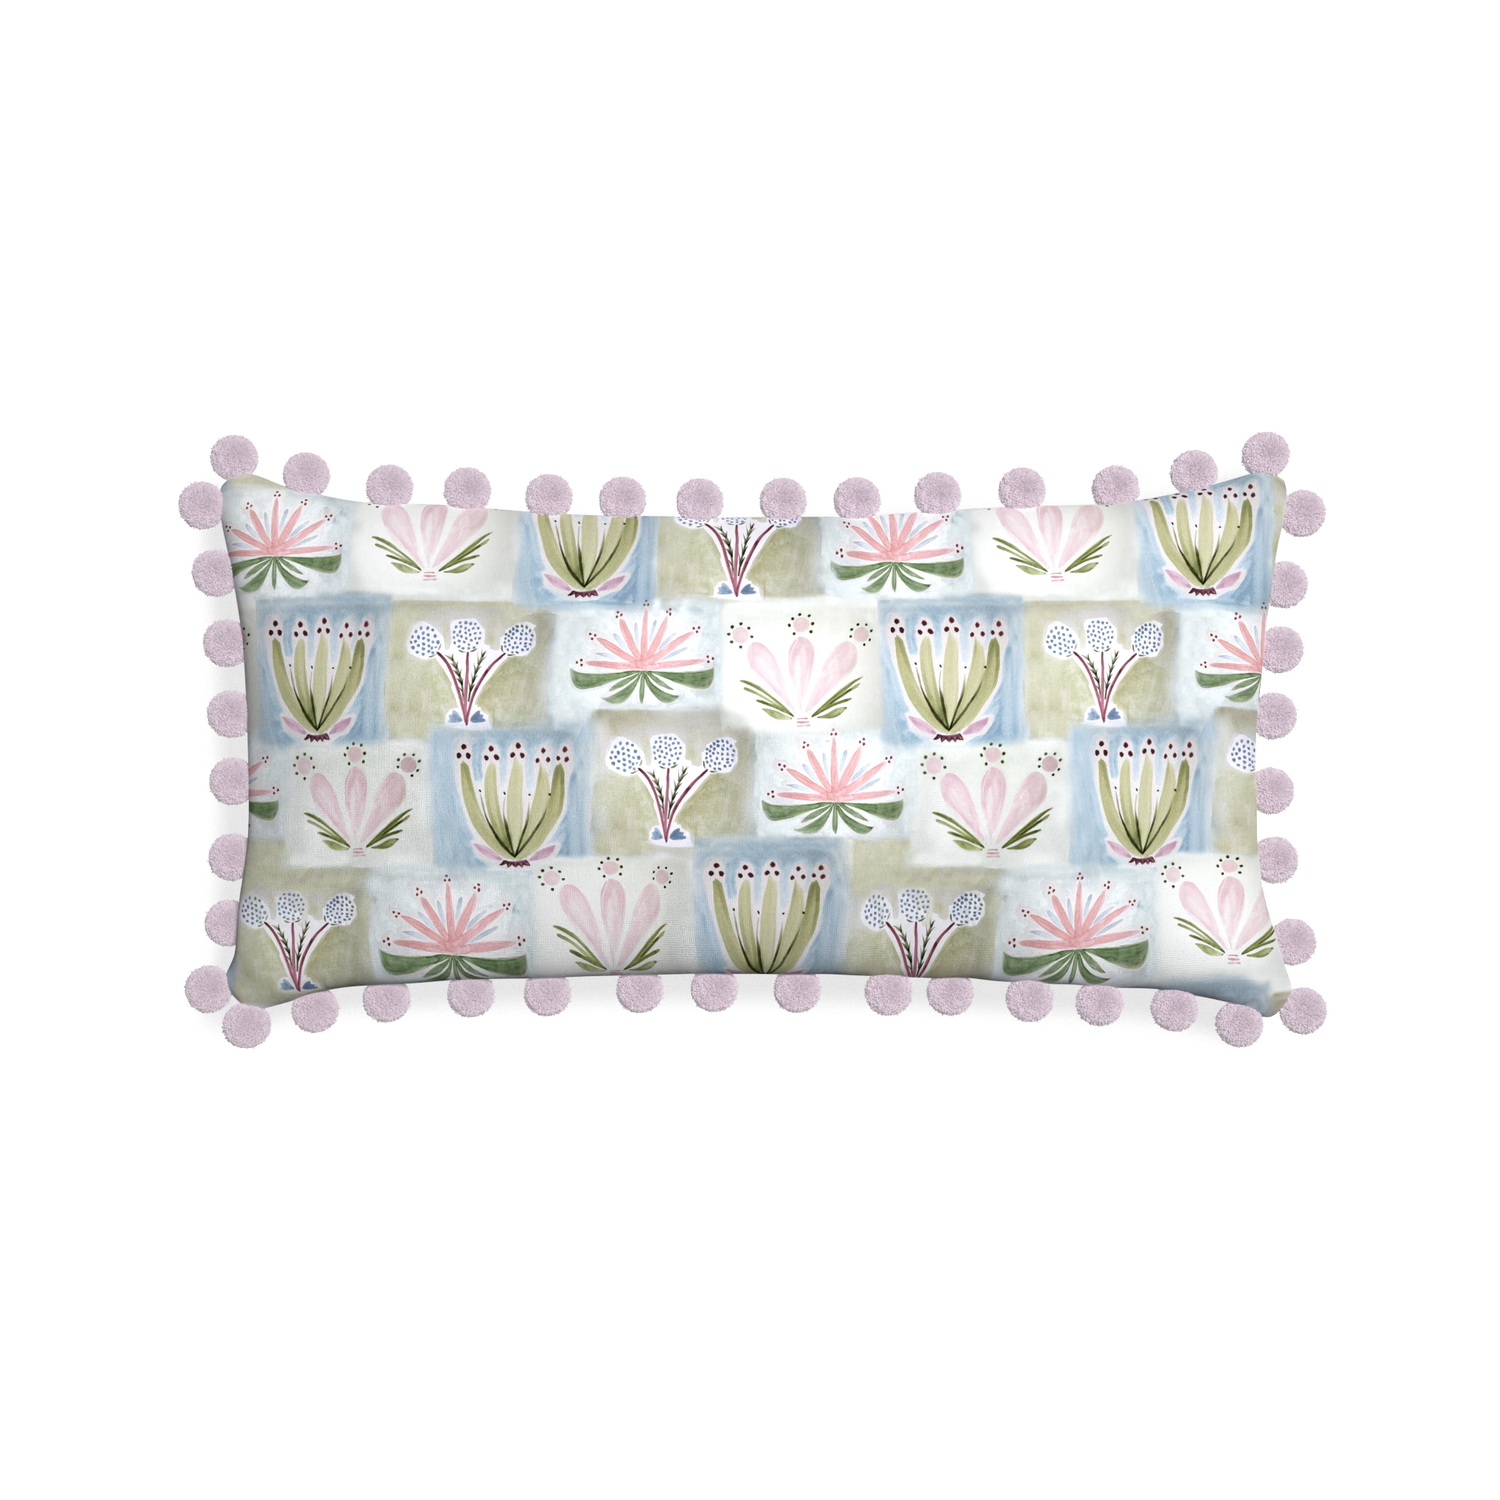 Midi-lumbar harper custom hand-painted floralpillow with l on white background